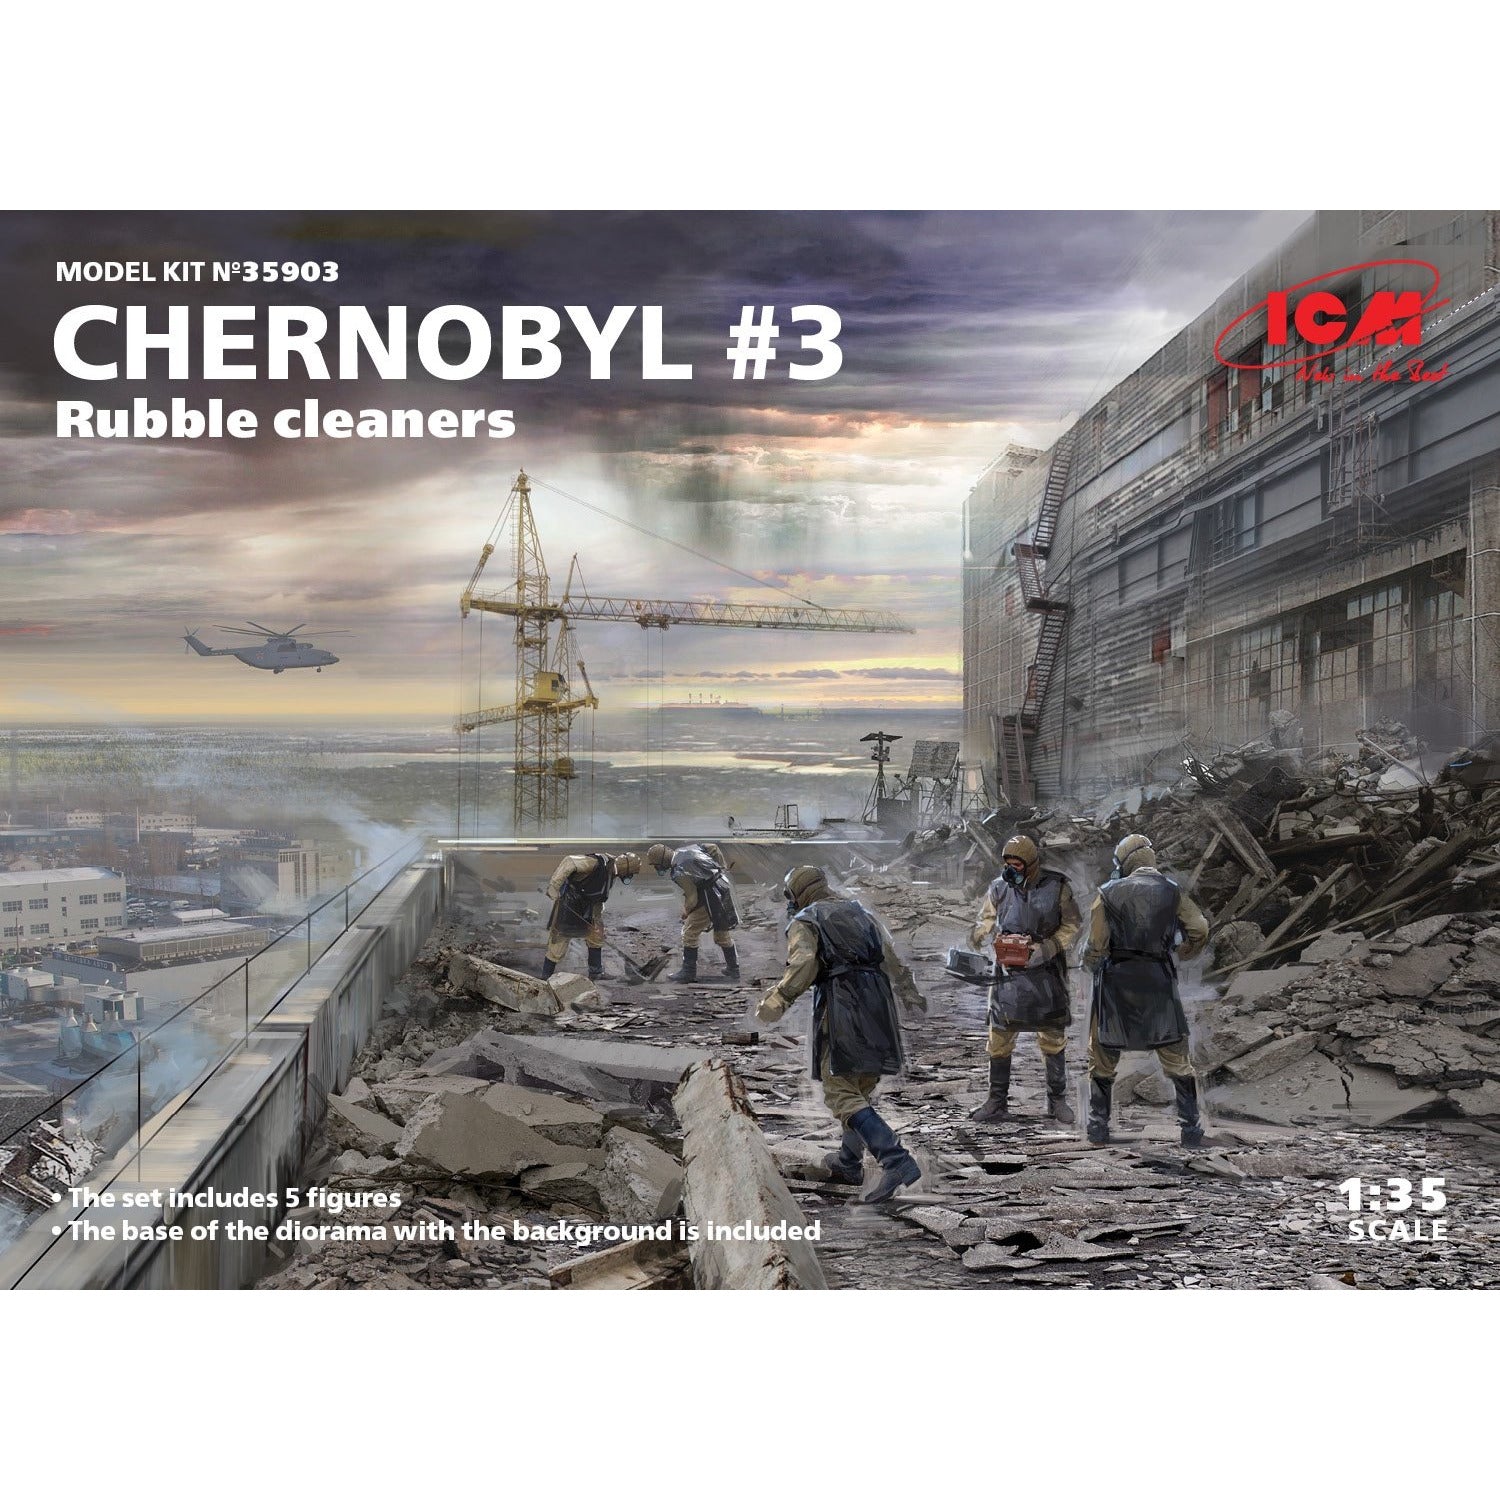 Chernobyl #3 Rubble cleaners (5 figures) 1/35 Scale by ICM